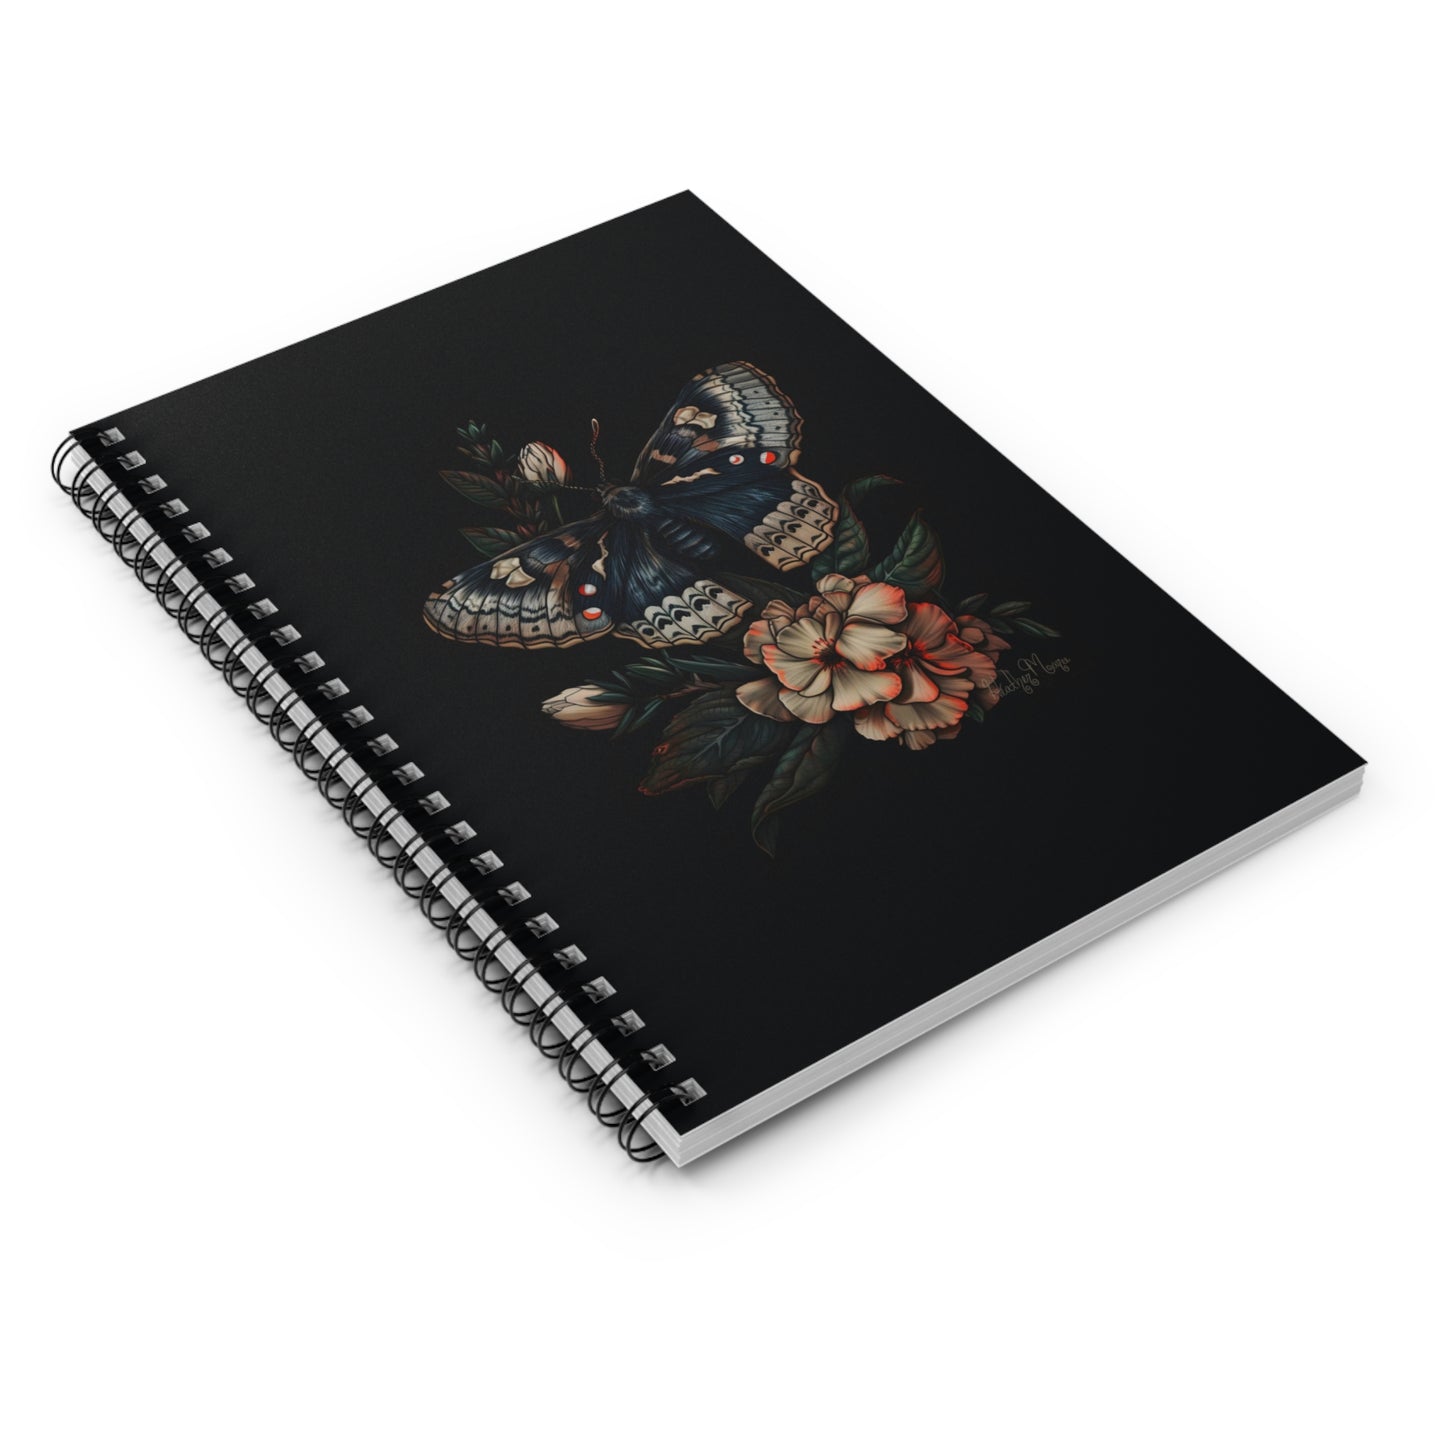 Blue Moth with Flowers | Ruled Line Spiral Notebook